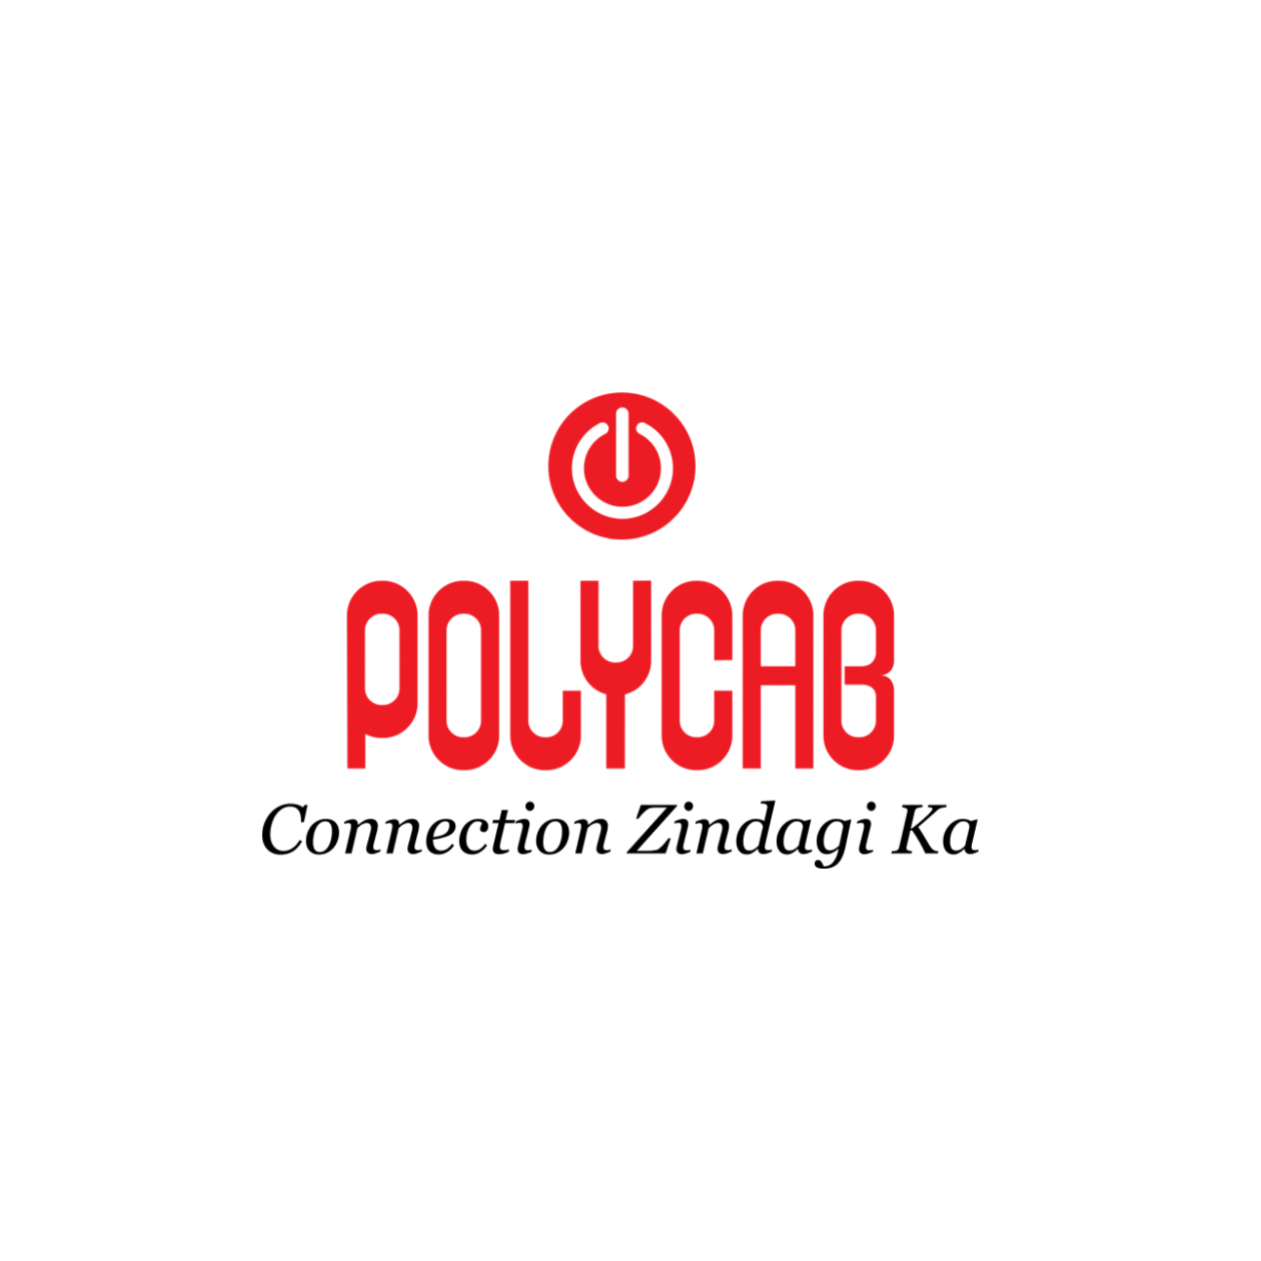 PolycabIndiaLimited